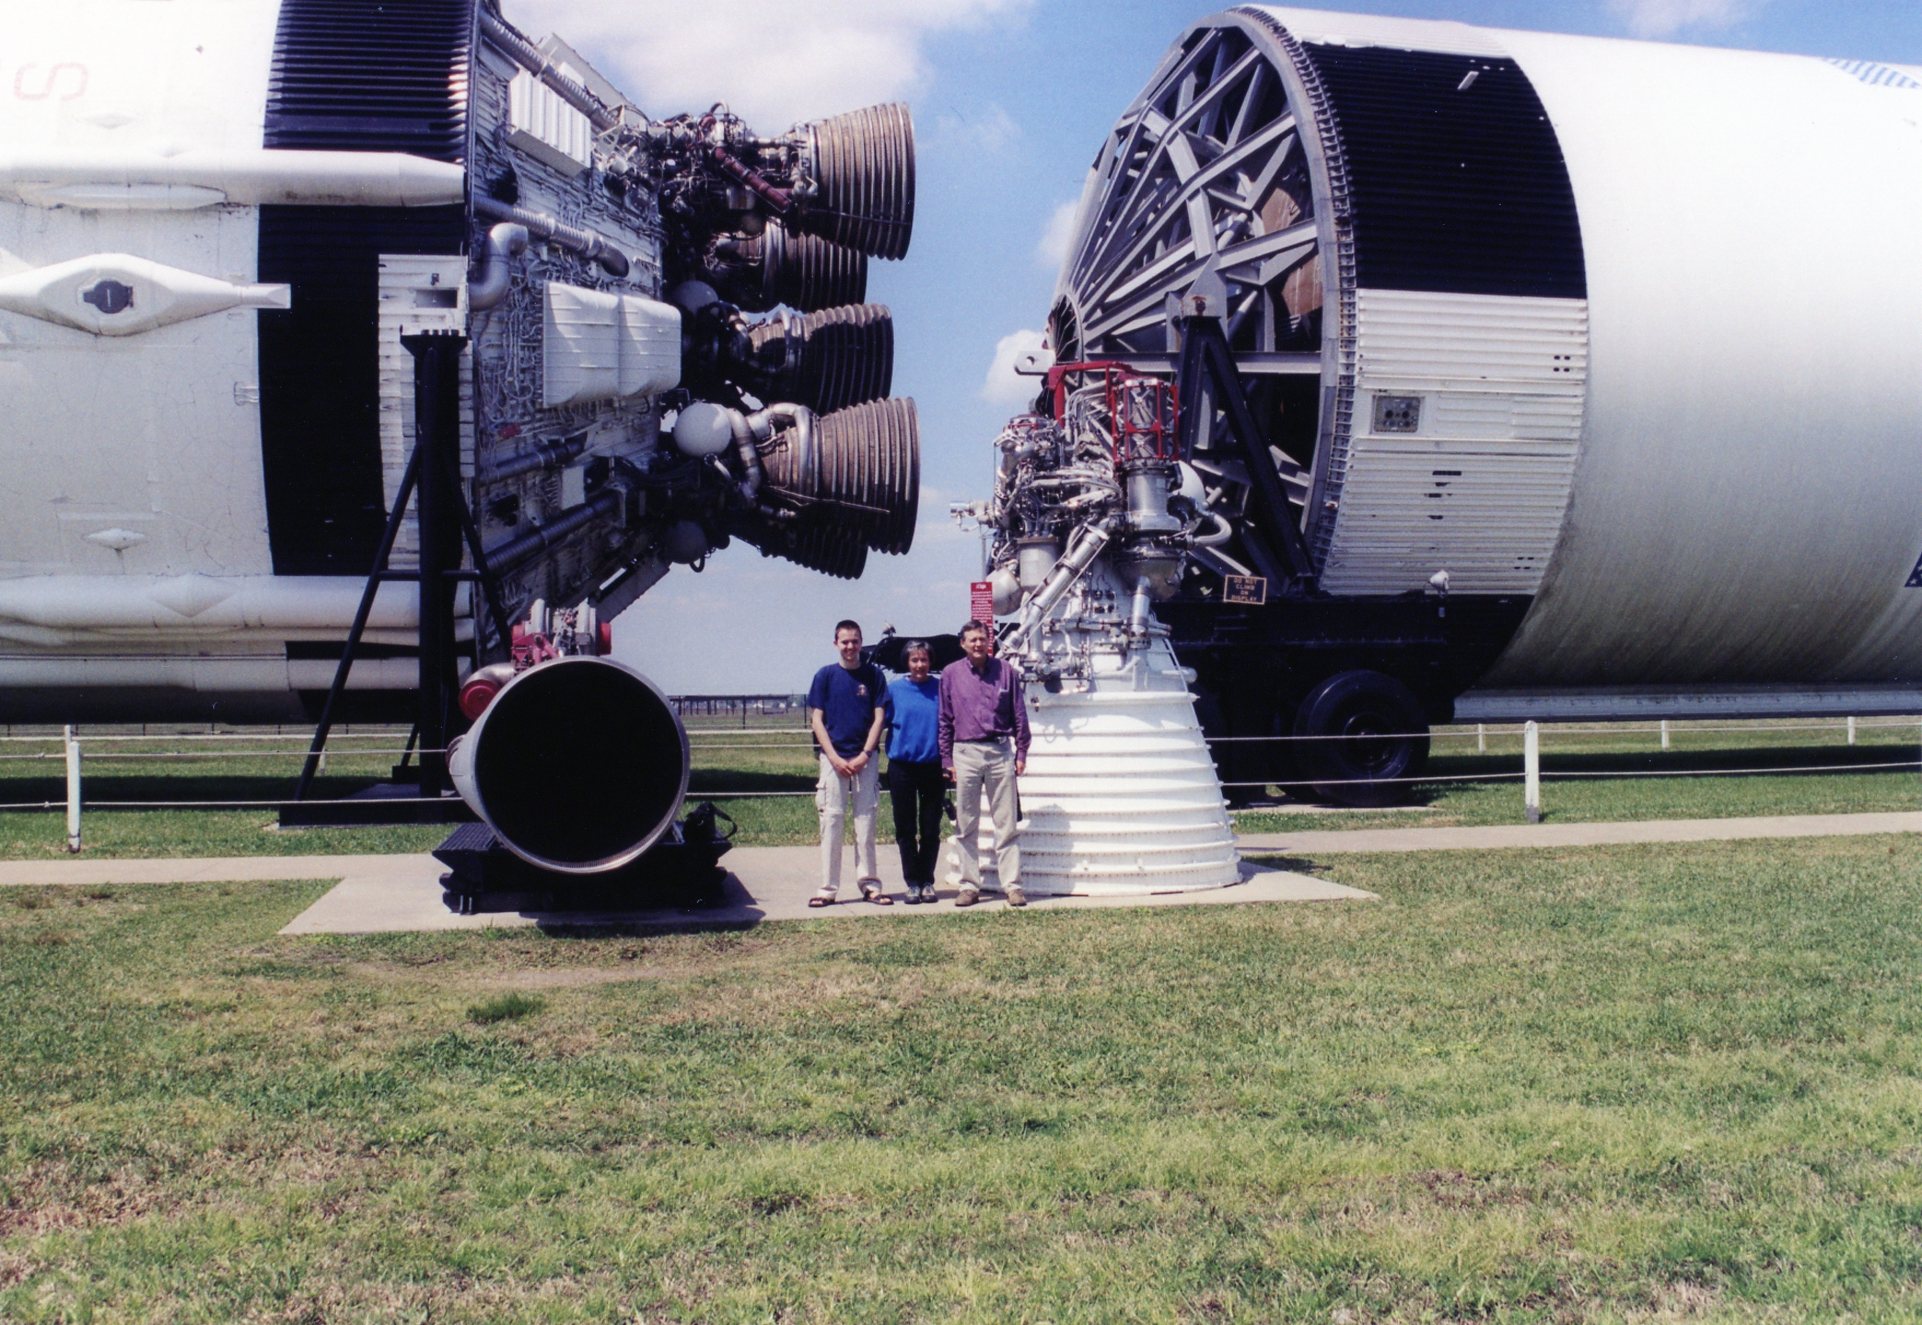 Photos from my 2003 visit to Johnson Space Center: Your blogger and his parents posing between the S-IC and S-II stages of the Saturn V rocket on display.